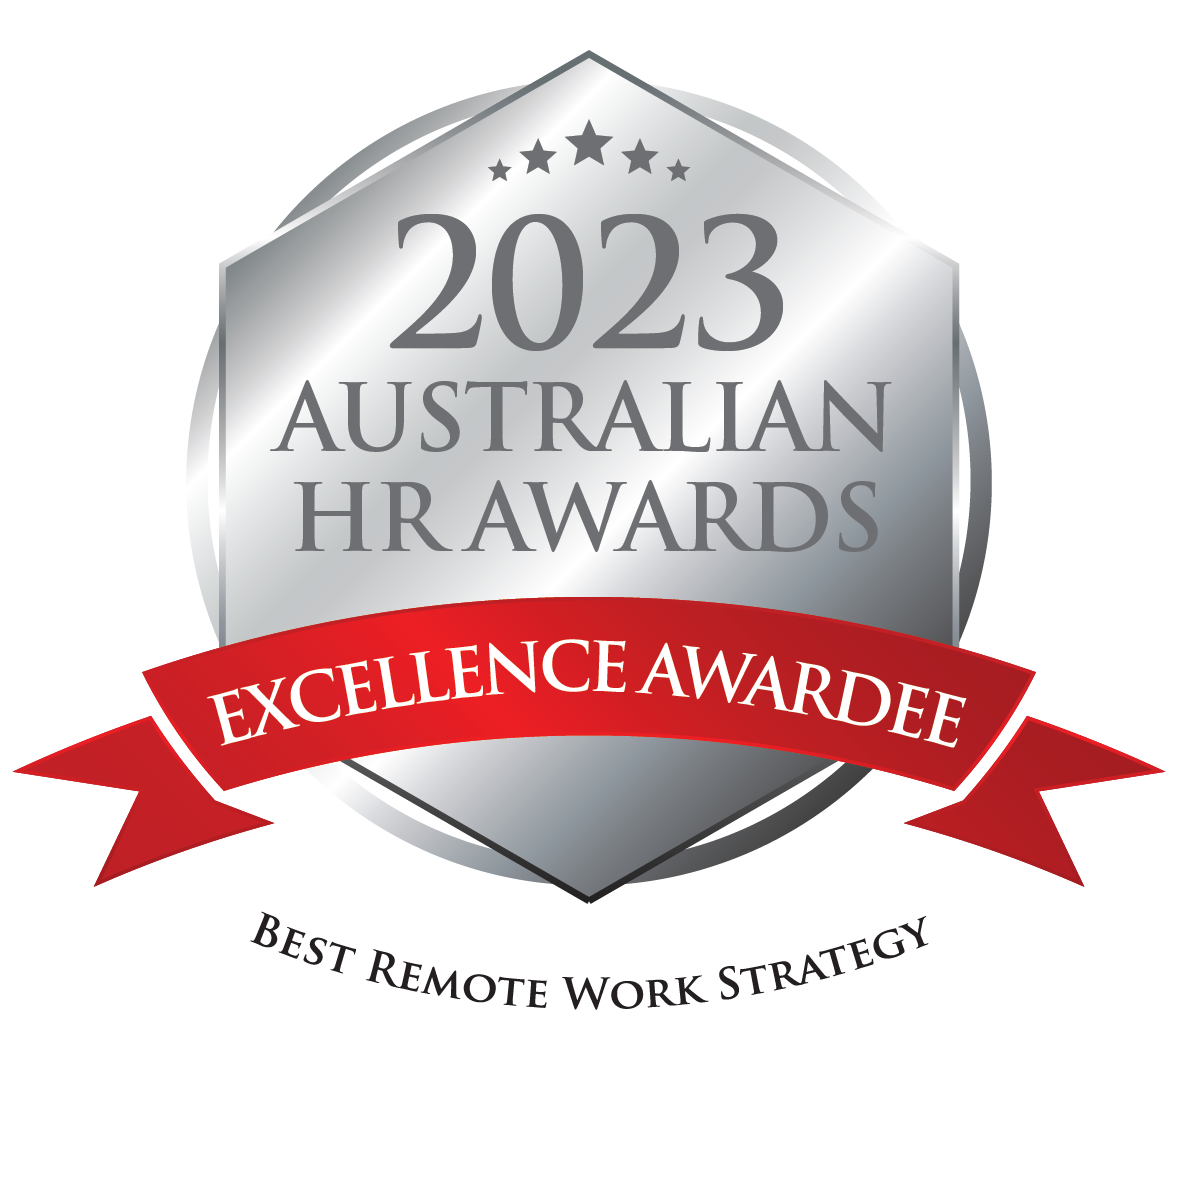 AHRA23 Excellence Awardee Medal_Best Remote Work Strategy - Eli Lilly Australia & New Zealand.png